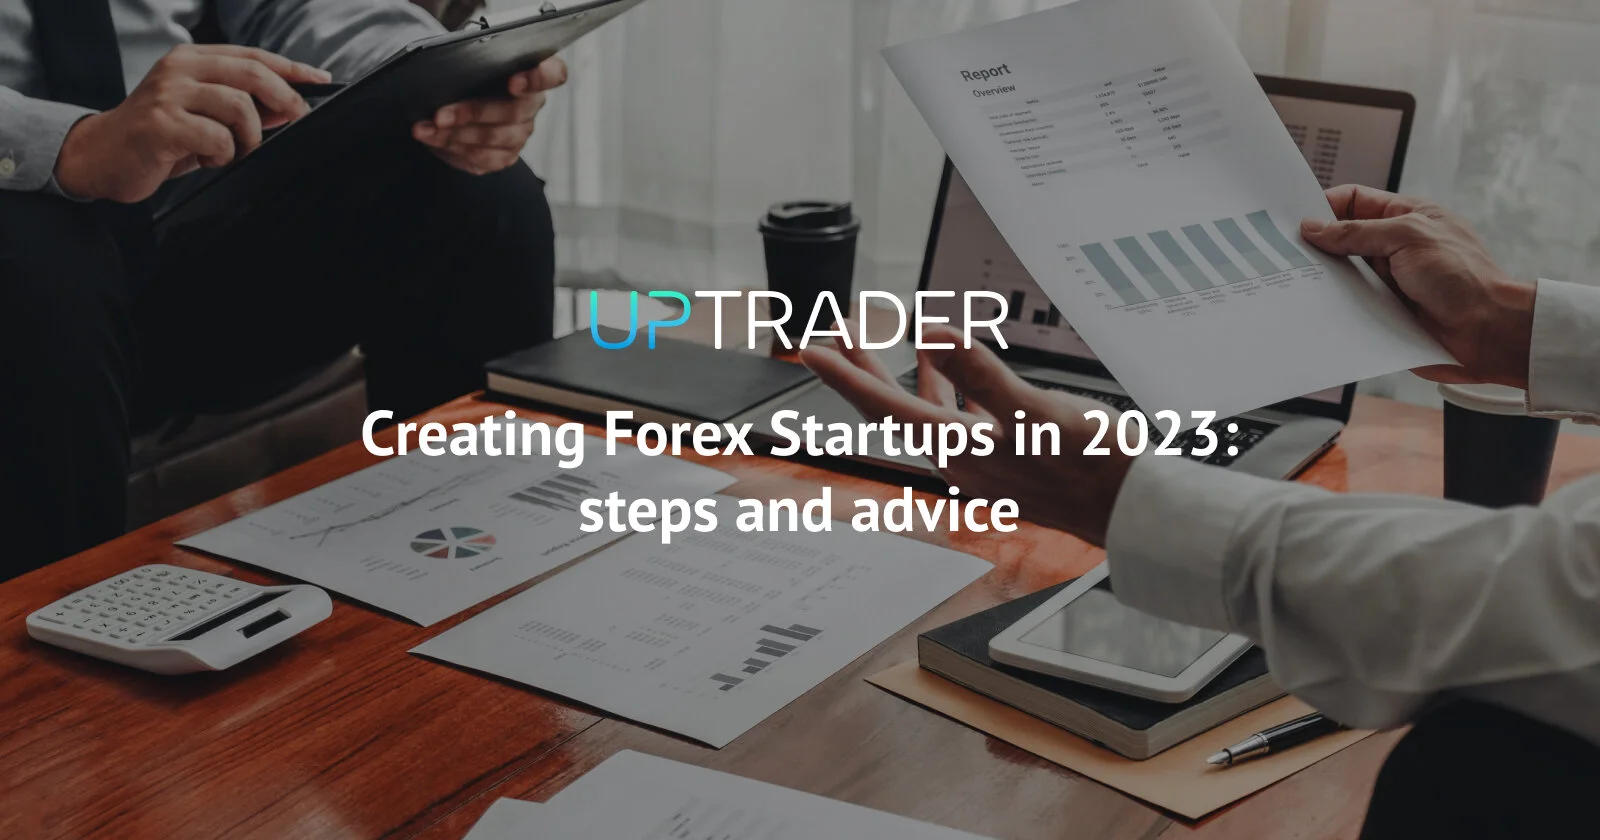 Basic tools for starting a new forex brokerage company in 2023